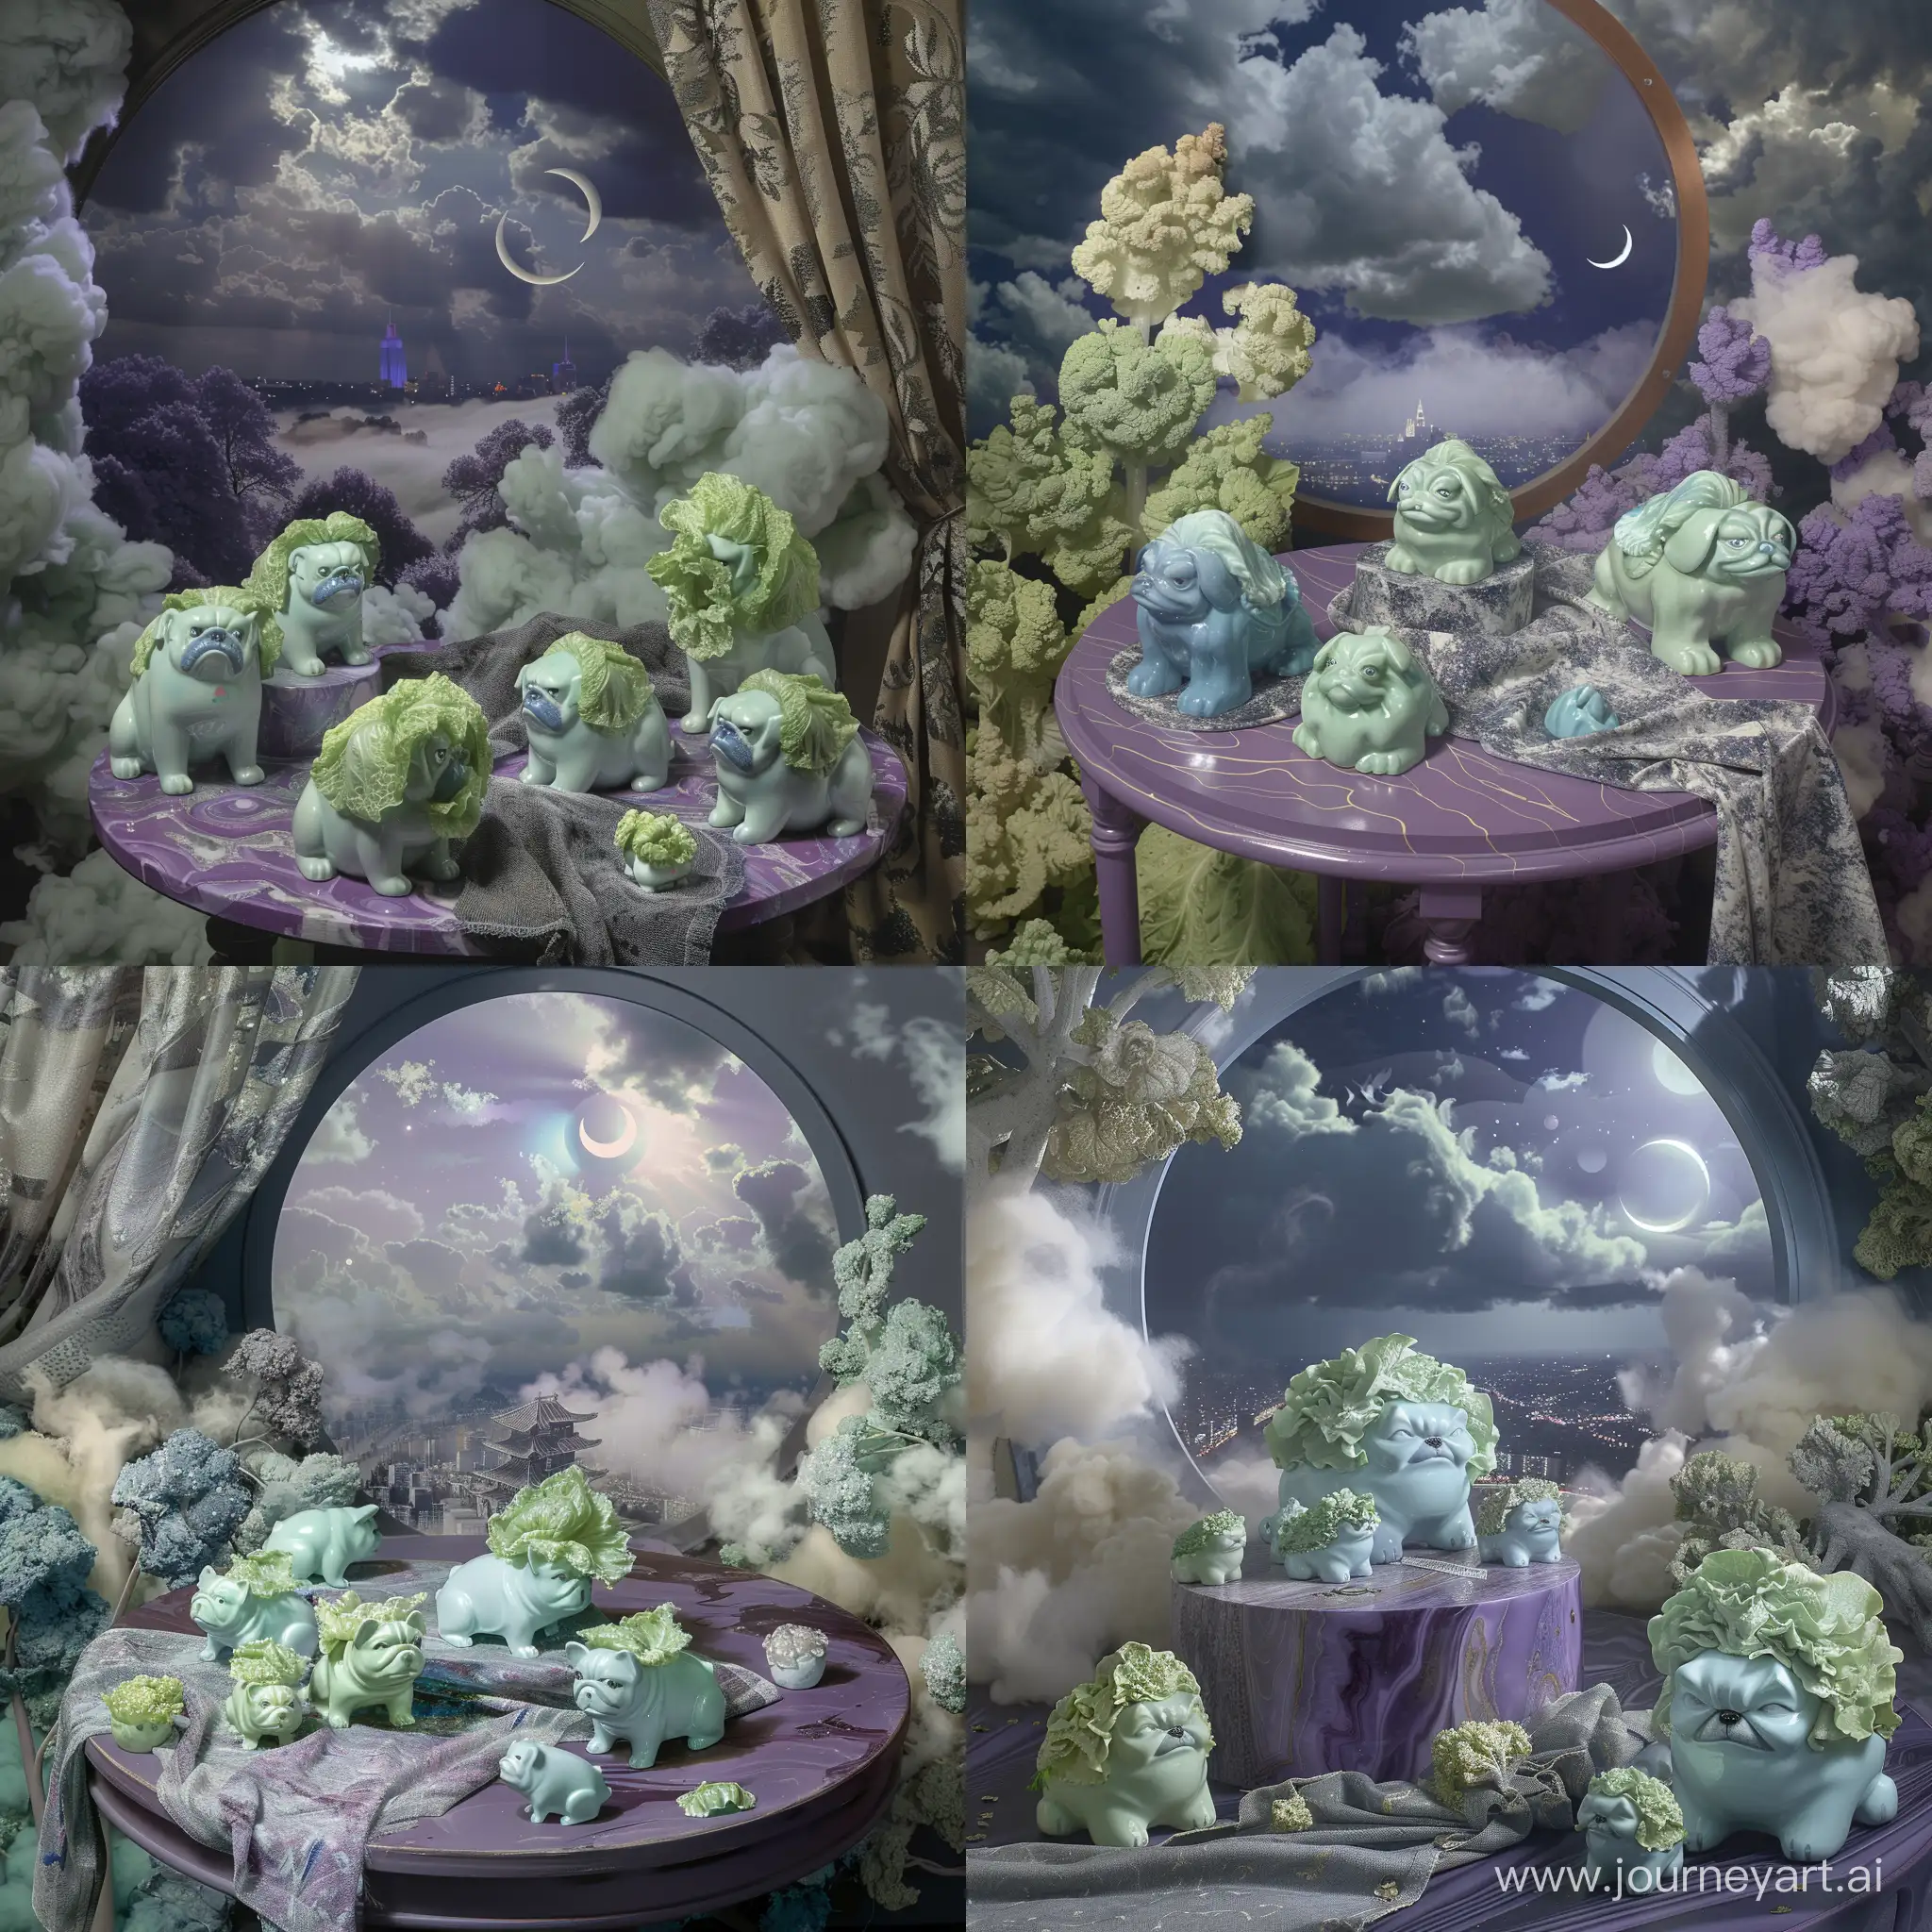 a still life setup of shiny porcelain pale green and mint and blue grumpy lettuce pug dogs on a purple grey round wood table with a with and grey marbled cloth, next to a round window through which a misty city and the crescent moon can be seen, the sky is dark and full of soft clouds with fluffy trees at the edges